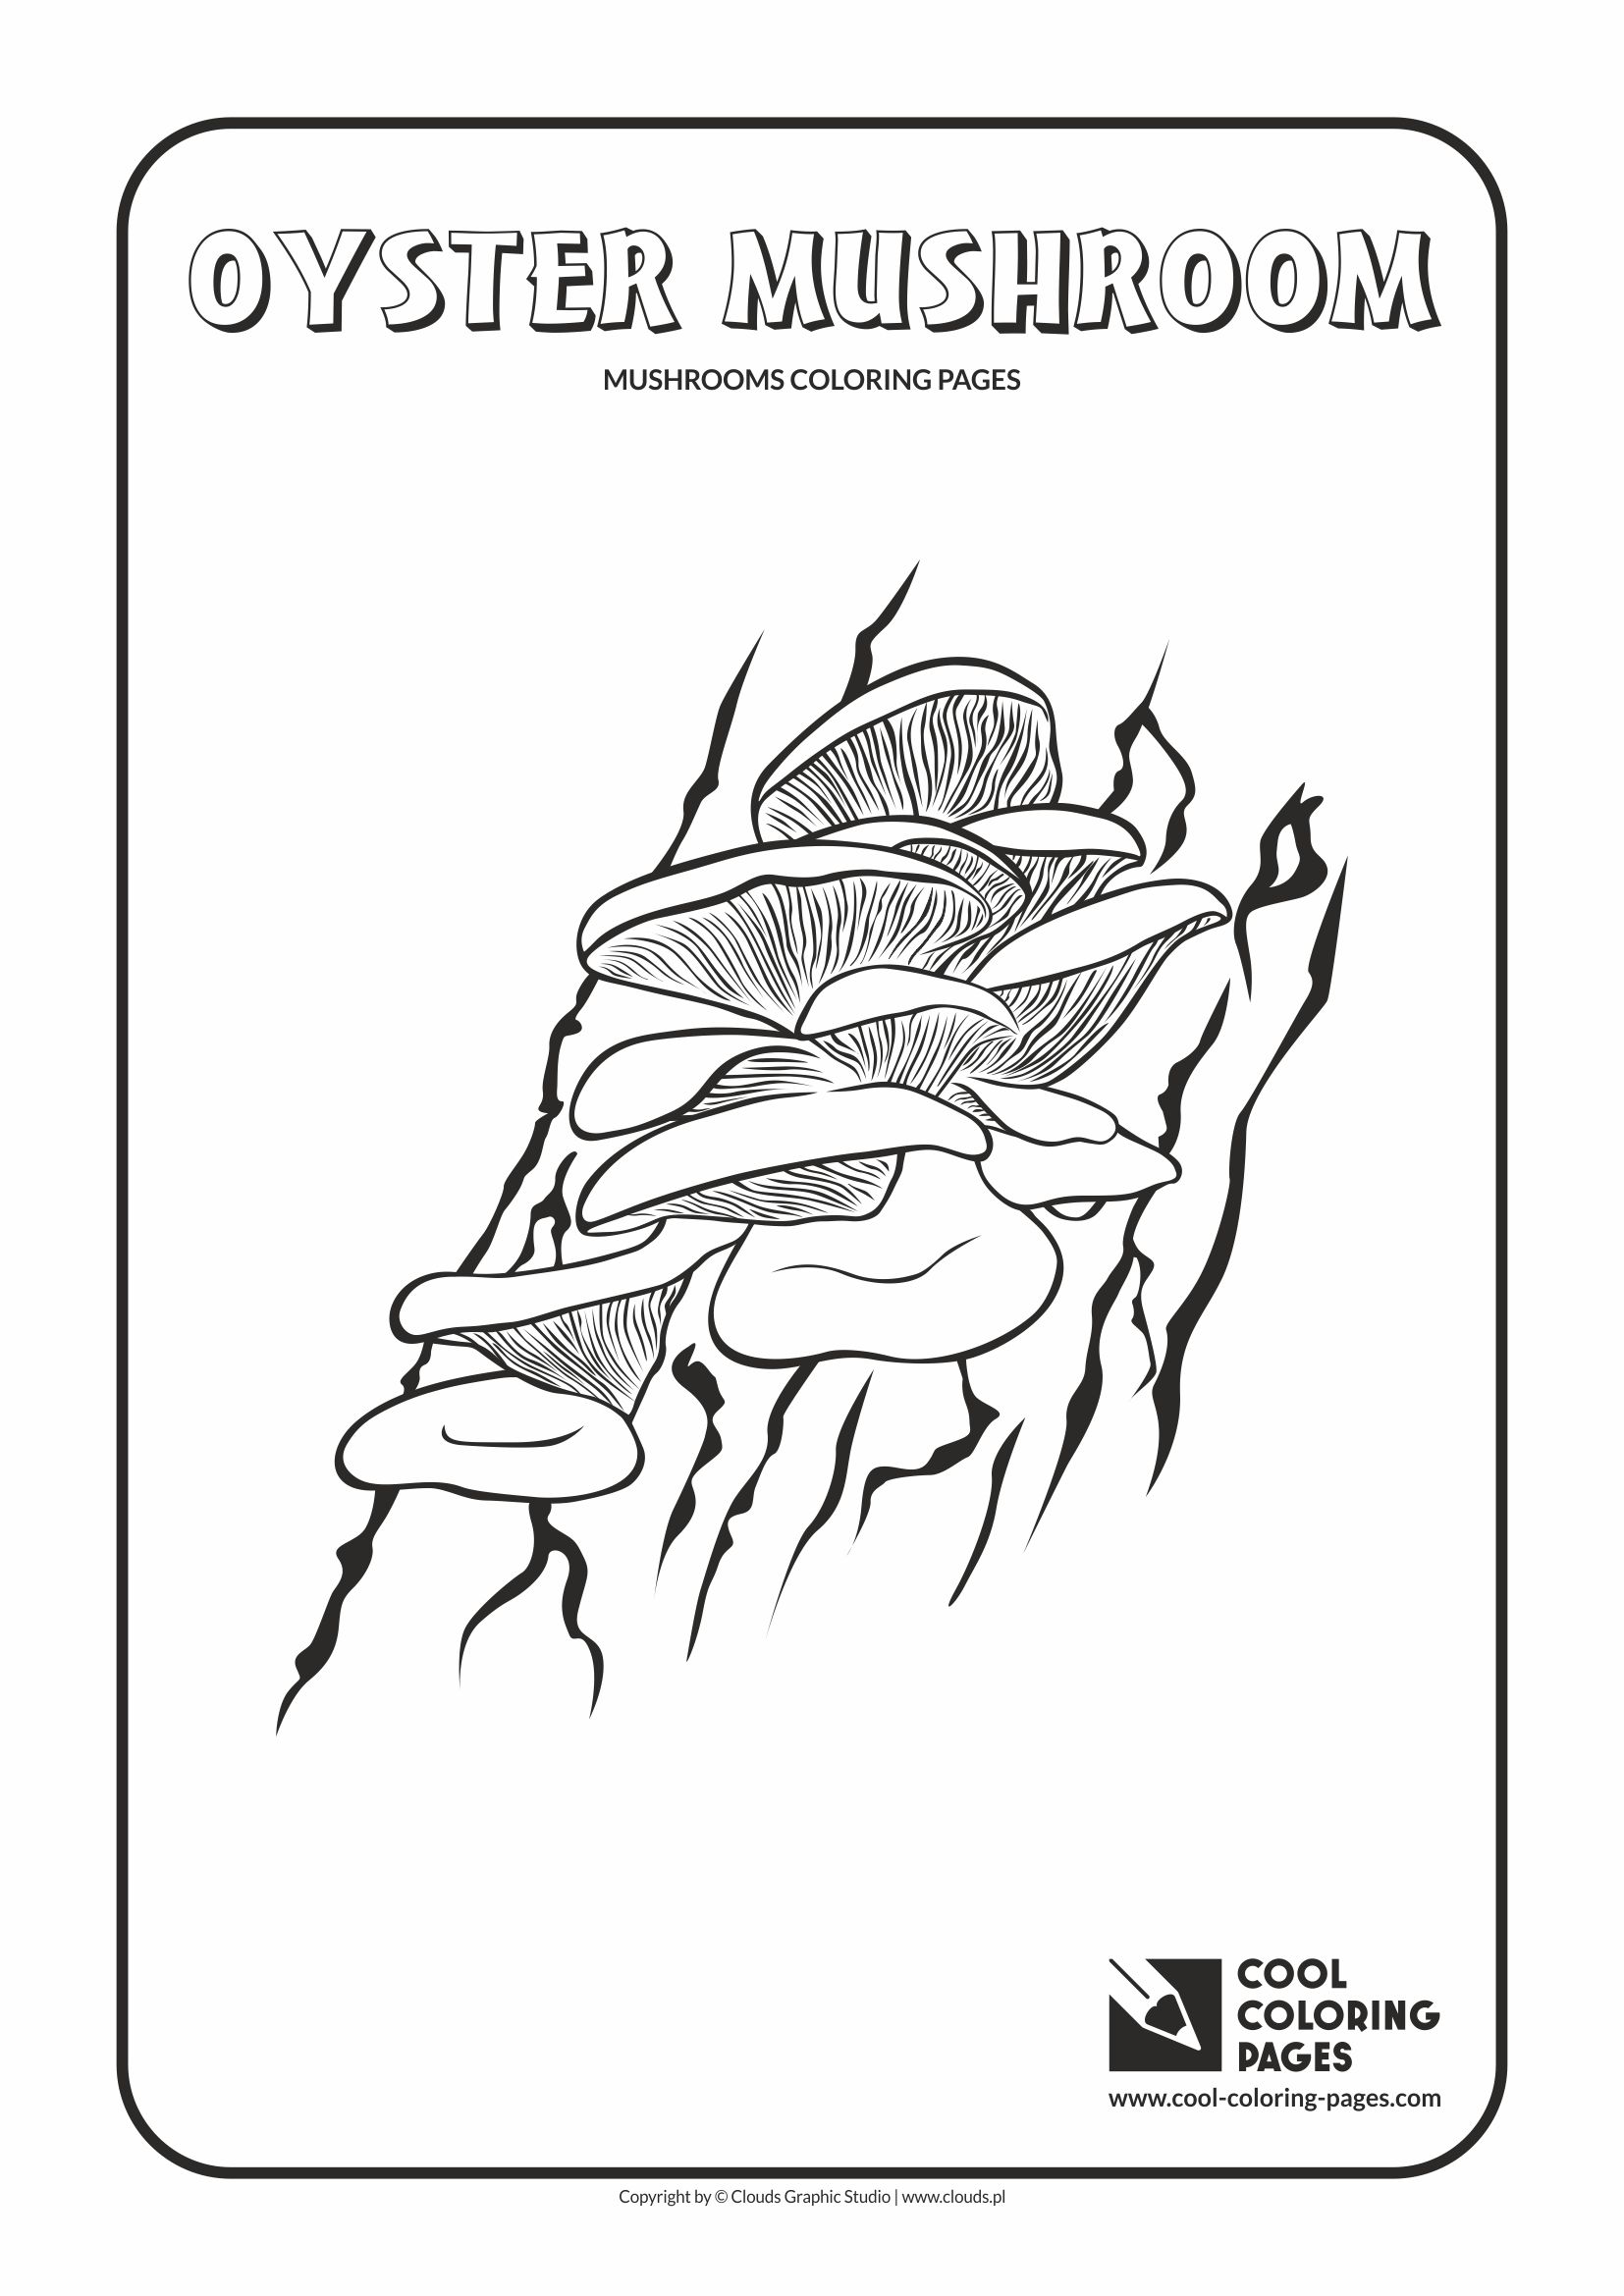 Cool Coloring Pages Mushrooms coloring pages Cool